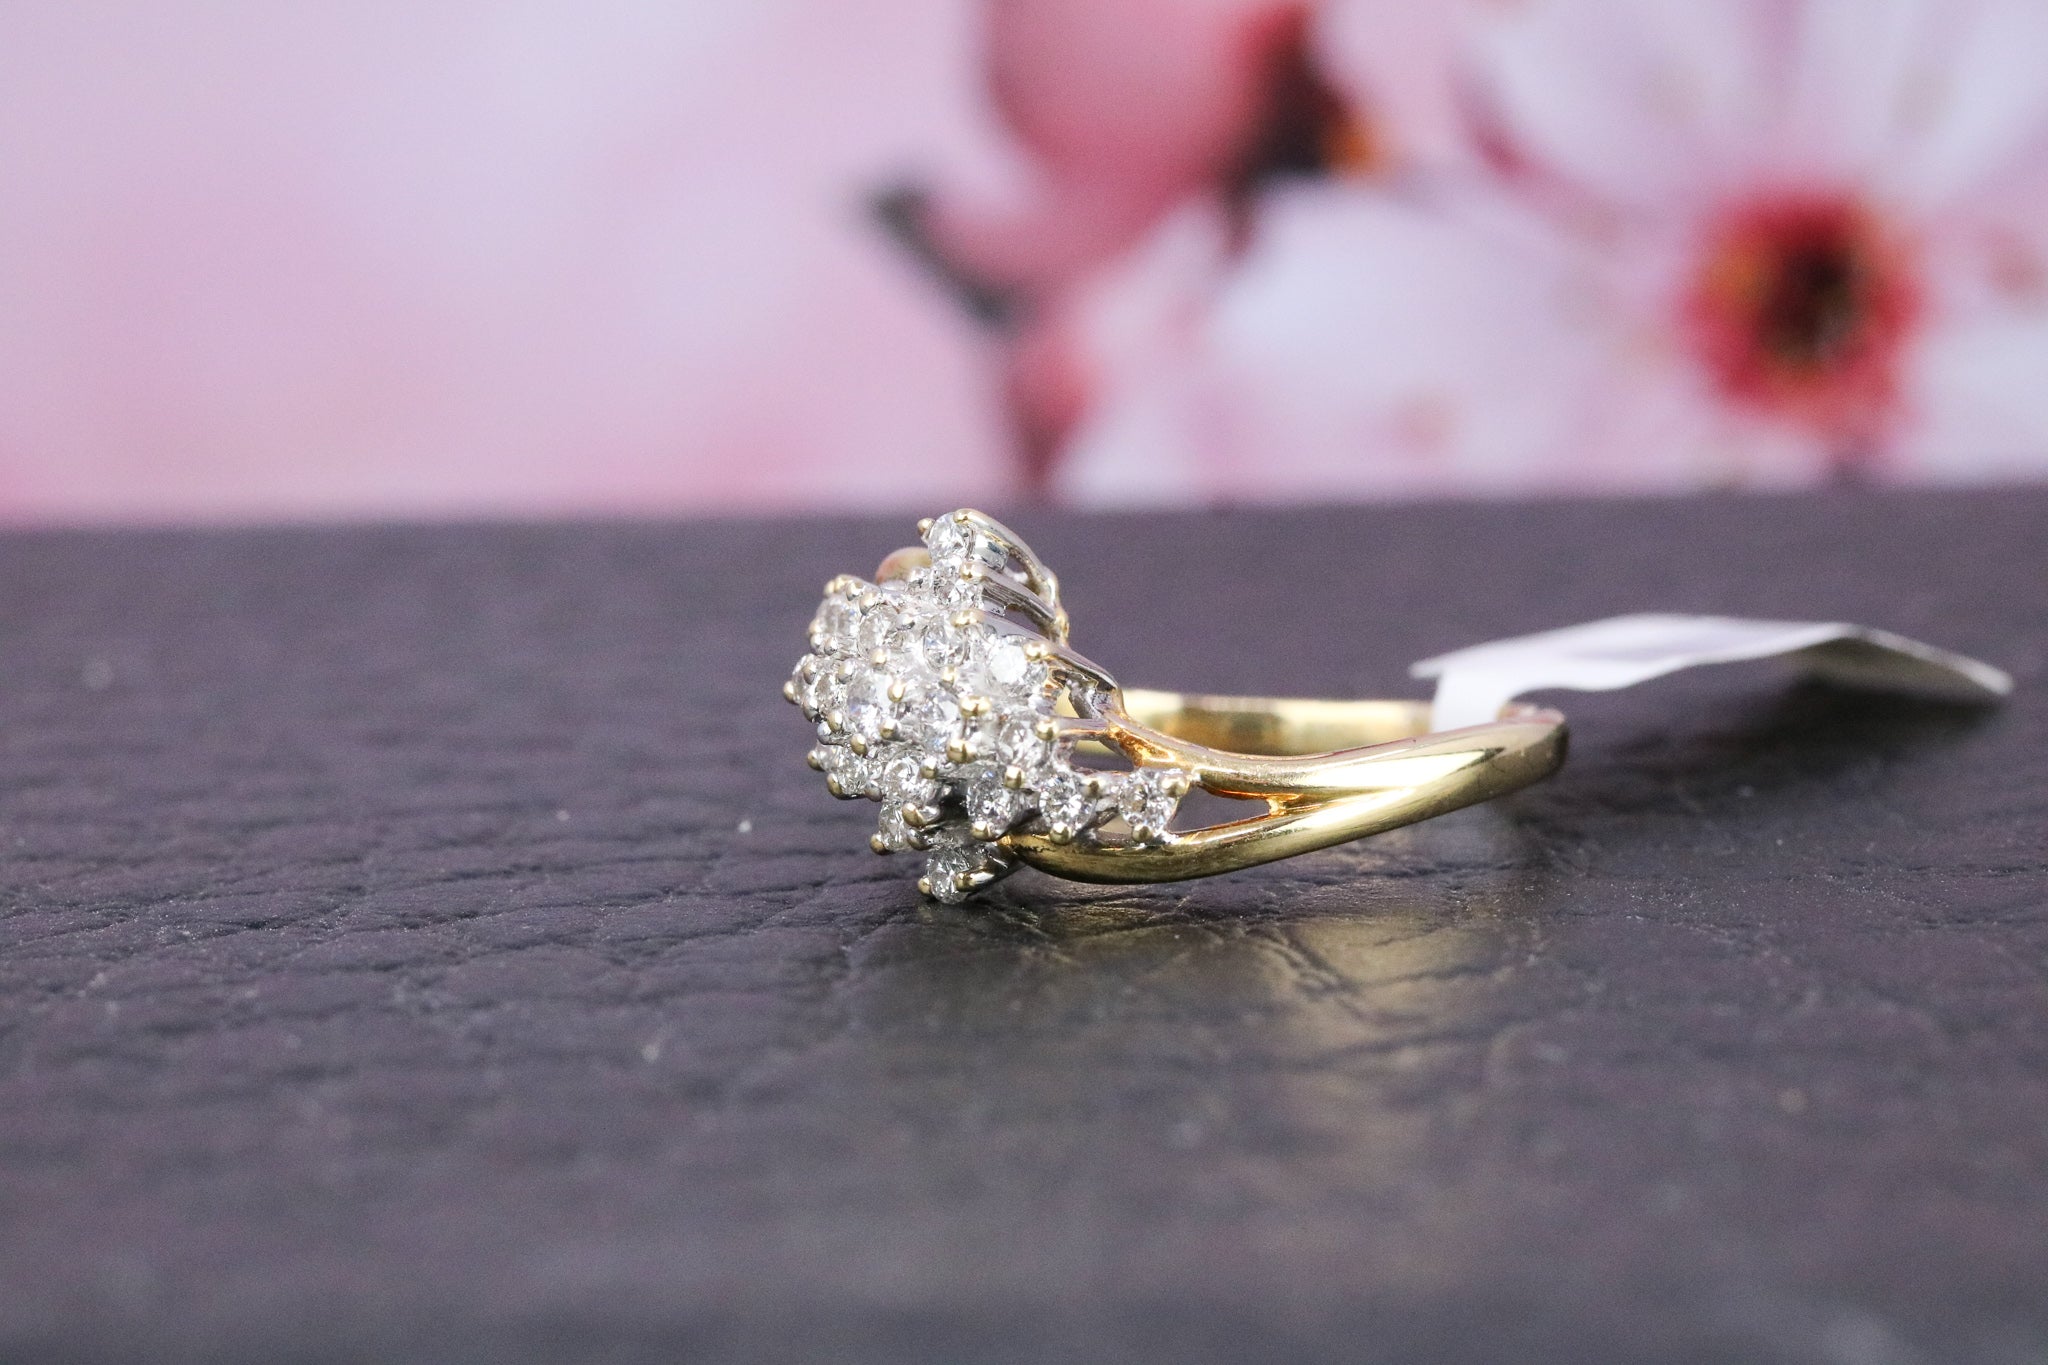 18ct Yellow Gold Diamond Ring - HJ2247 - Hallmark Jewellers Formby & The Jewellers Bench Widnes